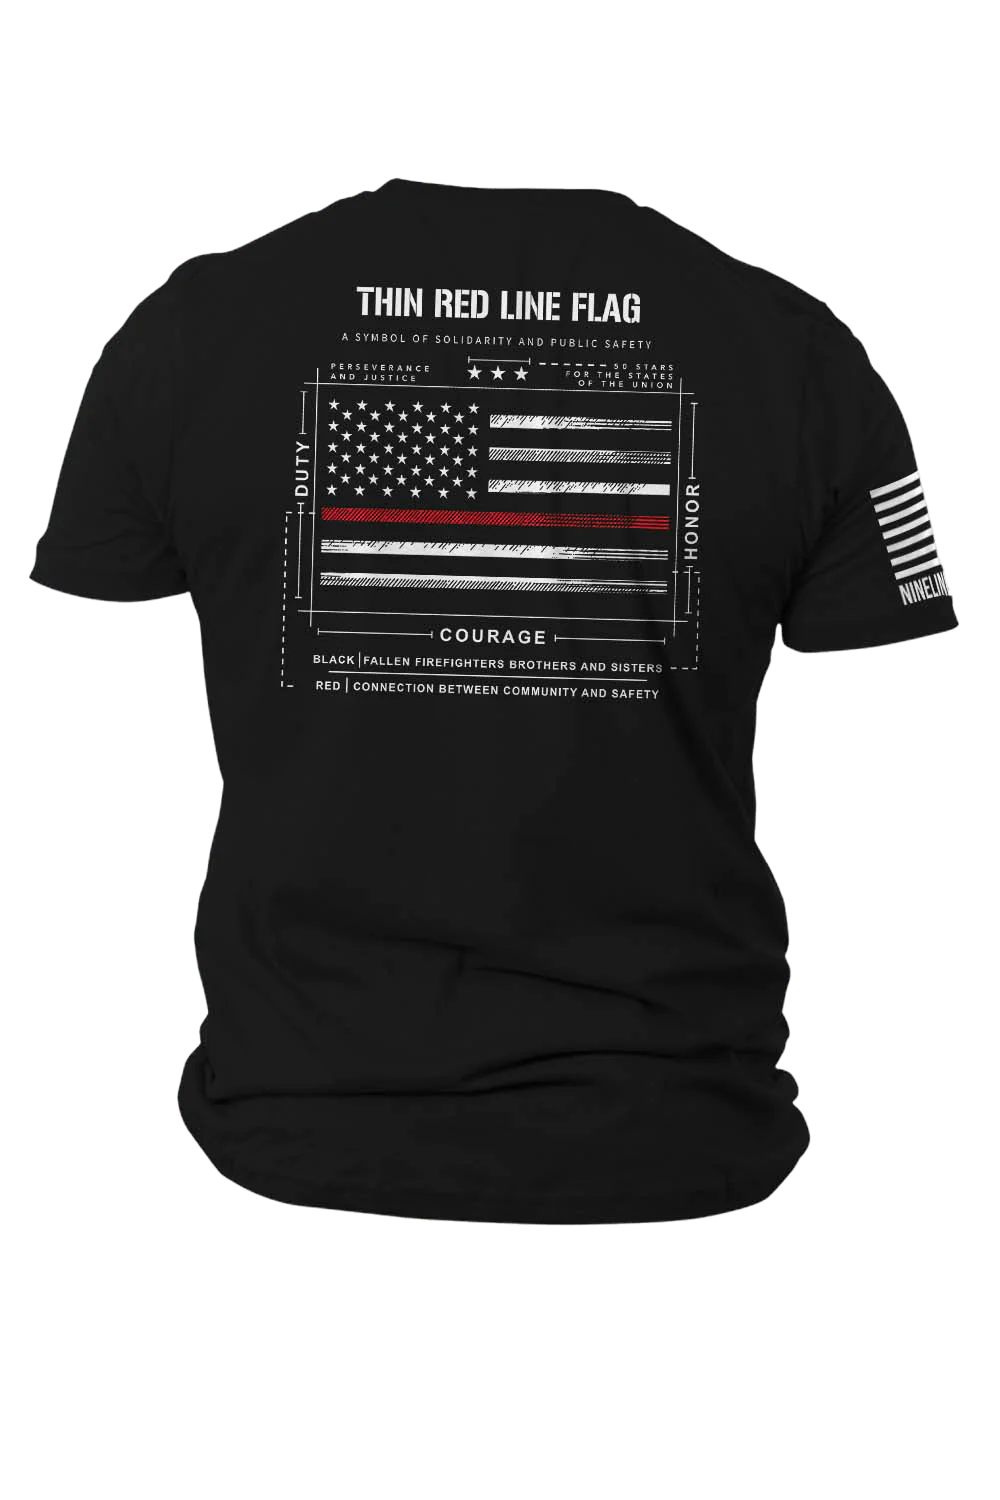 Nine Line T-Shirt - TRL Flag Schematic posted by ProdOrigin USA in Men's Apparel